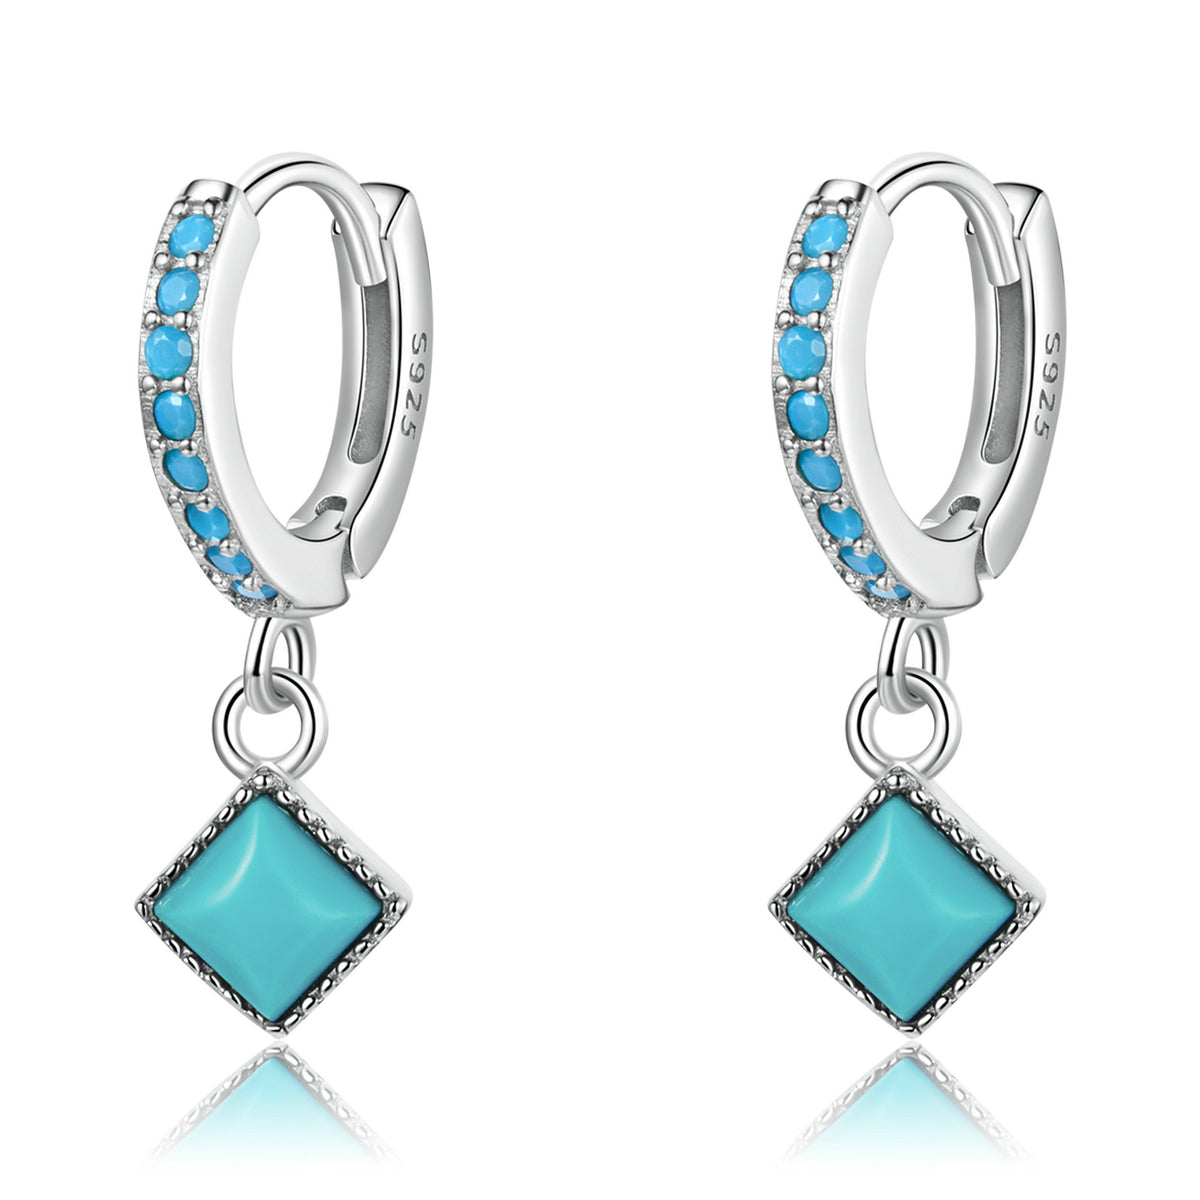 Square Turquoise Earrings - Sterling Silver 925 - High Quality Turquoise - NEW622